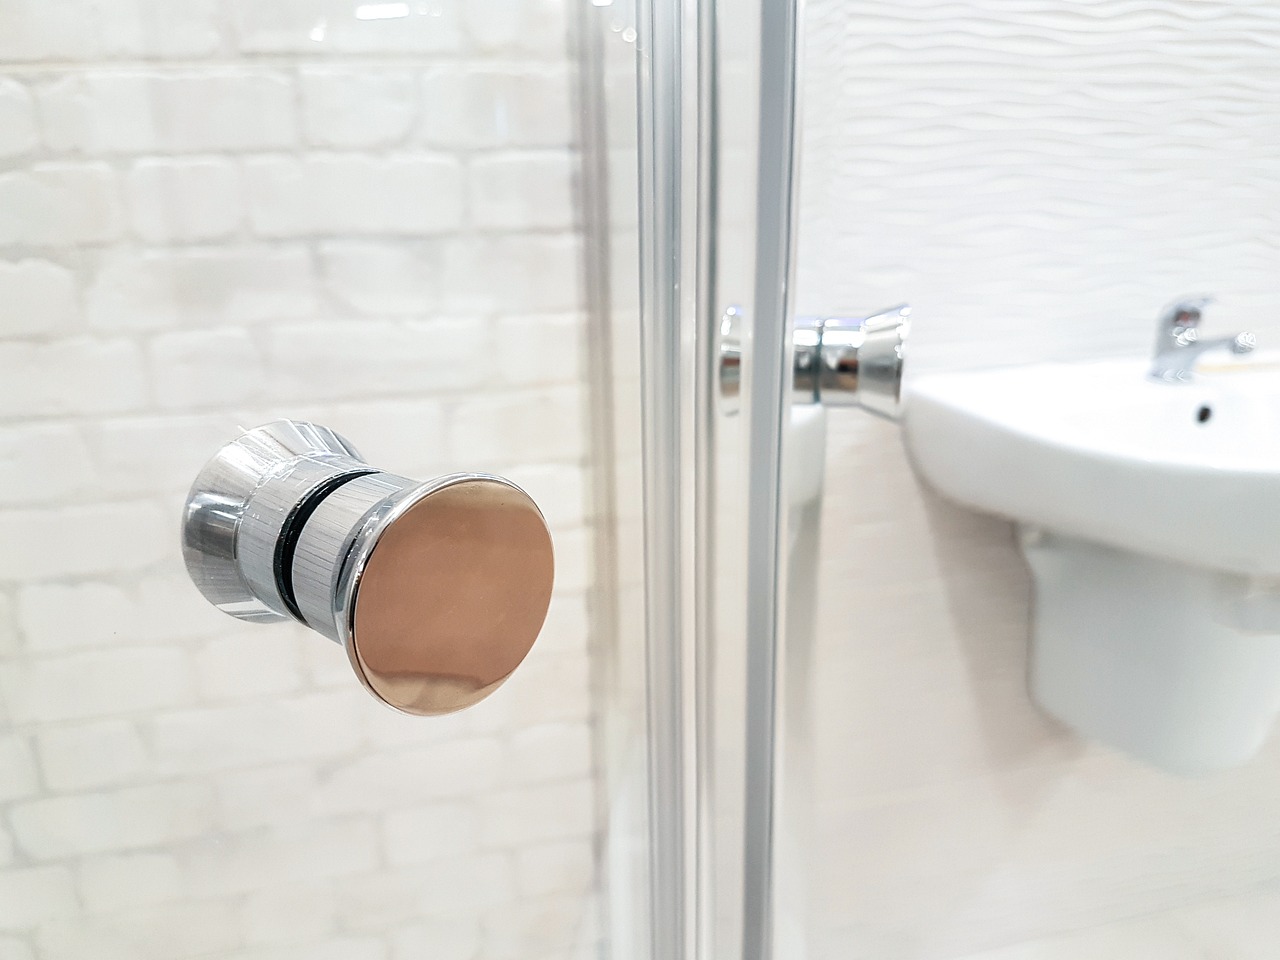 How to Remove a Kohler Shower Handle